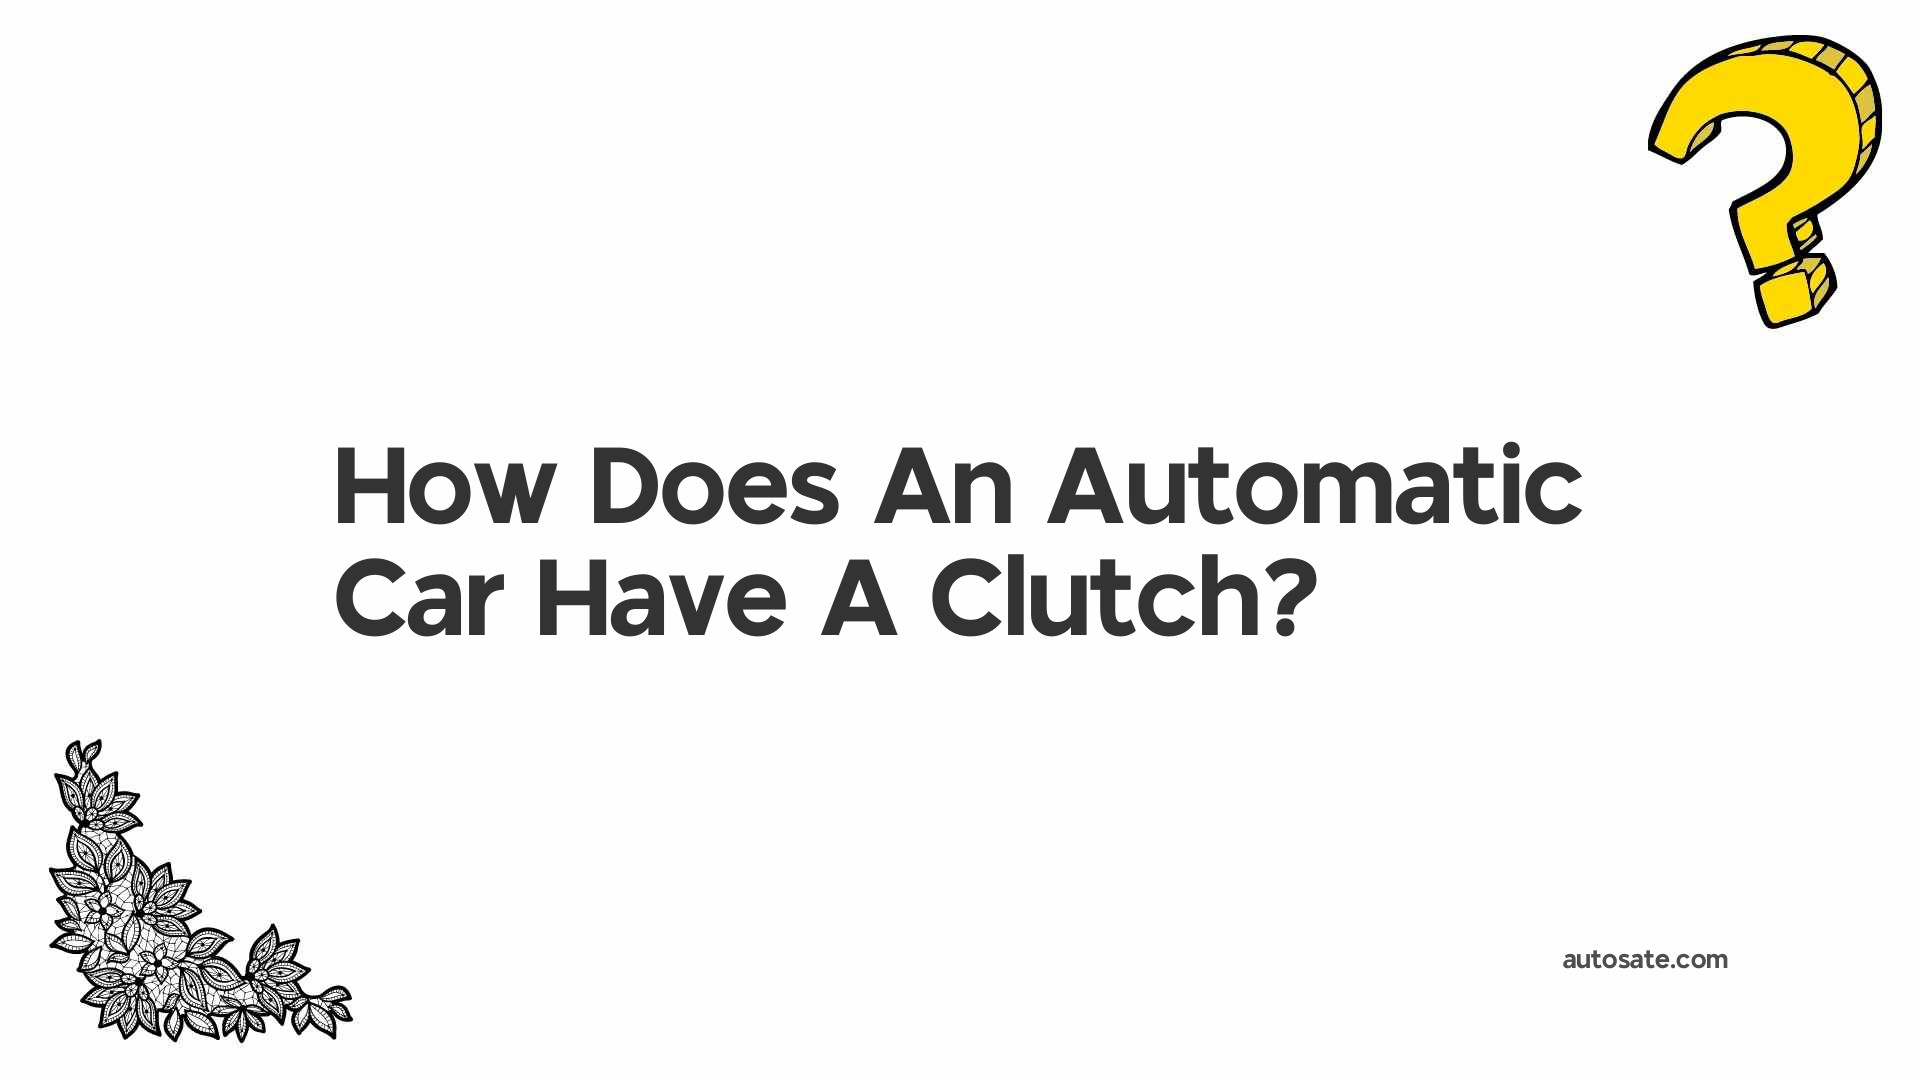 How Does An Automatic Car Have A Clutch?